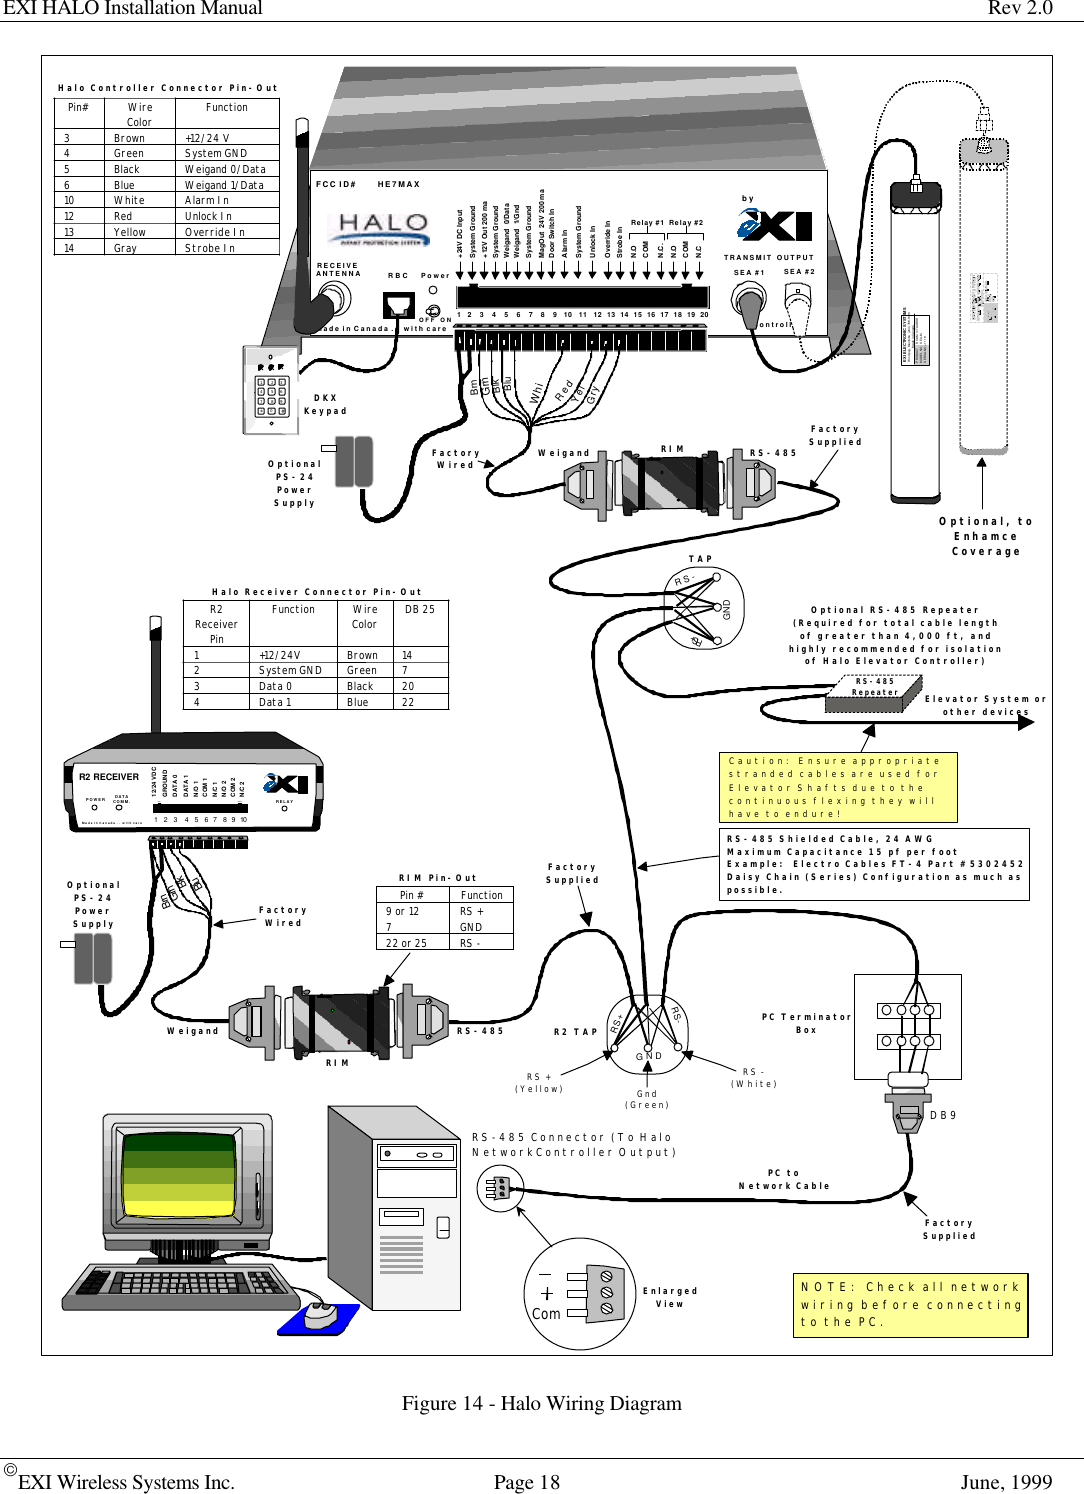 EXI HALO Installation Manual Rev 2.0EXI Wireless Systems Inc. Page 18 June, 1999Figure 14 - Halo Wiring DiagramRECEIVEANTENNA RBCFCC ID#          HE7MAXTRANSMIT  OUTPUTSEA #1 SEA #2Made in Canada . .  with care ControllerbyPower1    2     3     4     5     6     7     8     9    10    11    12   13   14   15   16   17   18   19   20+24V DC InputSystem Ground+12V Out 200 maSystem GroundWeigand  0/DataWeigand  1/GndSystem GroundMagOut  24V 200 maDoor Switch InSystem GroundUnlock InOverride InStrobe InN.OCOMN.C.N.OCOMN.CRelay #1 Relay #2Alarm InOFF  ONRS+RS-GNDRS+RS-GNDR2 RECEIVERDATACOMM.Made in Canada . .  with care12/24 VDCGROUNDDATA 0DATA 1N/O 1COM 1N/C 1N/O 2COM 2N/C 2POWER RELAY1    2    3     4    5    6   7    8   9   10DKXKeypadOptionalPS-24Power SupplyEXI ELECTRONIC SYSTEMSWinnipeg, Manitoba  (204) 788-1696Made in CanadaPRODUCTMODEL NO.SERIAL NO&gt;ROAM  II/TAGRRRSEA-M1118BrnRIMGrnBlkBluWhiRedYelGry1 2 34 5 67 8 9*0#GrnBlkBluRIMR2 TAPPC TerminatorBoxPC to Network CableRS-485WeigandBrnPin# WireColor Function3Brown +12/24 V4Green System GND5Black Weigand 0/Data6Blue Weigand 1/Data10 White Alarm In12 Red Unlock In13 Yellow Override In14 Gray Strobe InFactoryWiredFactoryWiredRS-485 Shielded Cable, 24 AWGMaximum Capacitance 15 pf per footExample:  Electro Cables FT-4 Part #5302452Daisy Chain (Series) Configuration as much aspossible.RS-485 Connector (To Halo NetworkController Output)DB9R2ReceiverPinFunction WireColor DB 251+12/24V Brown 142System GND Green 73Data 0 Black 204Data 1 Blue 22TAPOptionalPS-24Power SupplyPin # Function9 or 12 RS +7GND22 or 25 RS -RIM Pin-OutComNOTE:  Check all networkwiring before connectingto the PC.EnlargedViewRS +(Yellow) Gnd(Green)RS -(White)Caution:  Ensure appropriatestranded cables are used for Elevator Shafts due to thecontinuous flexing they willhave to endure!FactorySuppliedFactorySuppliedRS-485WeigandFactorySuppliedOptional RS-485 Repeater(Required for total cable lengthof greater than 4,000 ft, and highly recommended for isolation of Halo Elevator Controller)RS-485RepeaterHalo Receiver Connector Pin-OutHalo Controller Connector Pin-OutOptional, toEnhamce CoverageElevator System orother devices